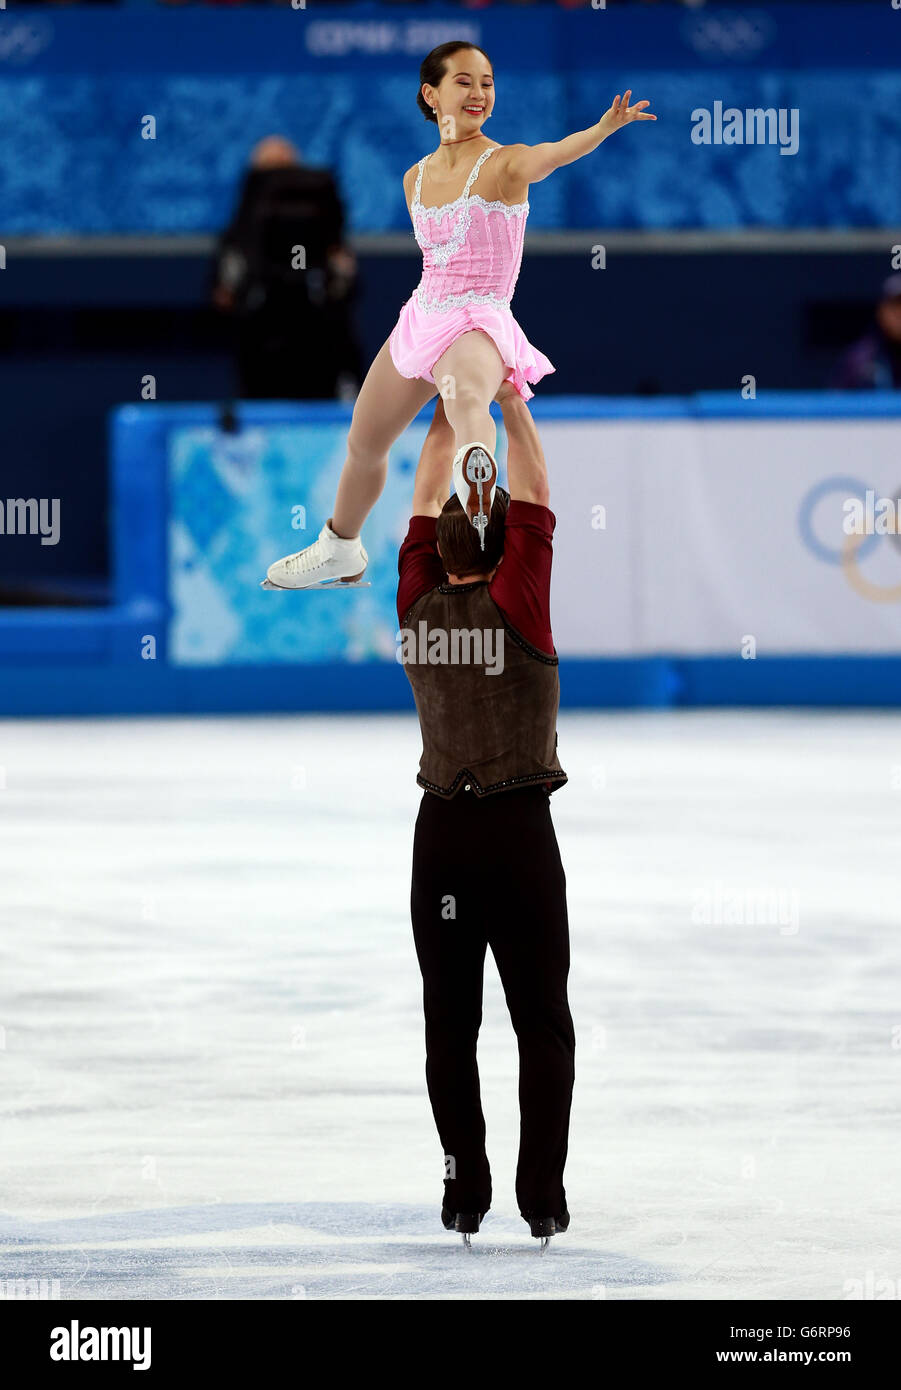 The USA's Felicia Zhang and Nathan Bartholomay compete during the pairs short program of figure skating event during the 2014 Sochi Olympic Games in Sochi, Russia. PRESS ASSOCIATION Photo. Picture date: Tuesday February 11, 2014. See PA story OLYMPICS. Photo credit should read: David Davies/PA Wire. RESTRICTIONS: For news services only. Editorial purposes only. No video emulation. Stock Photo